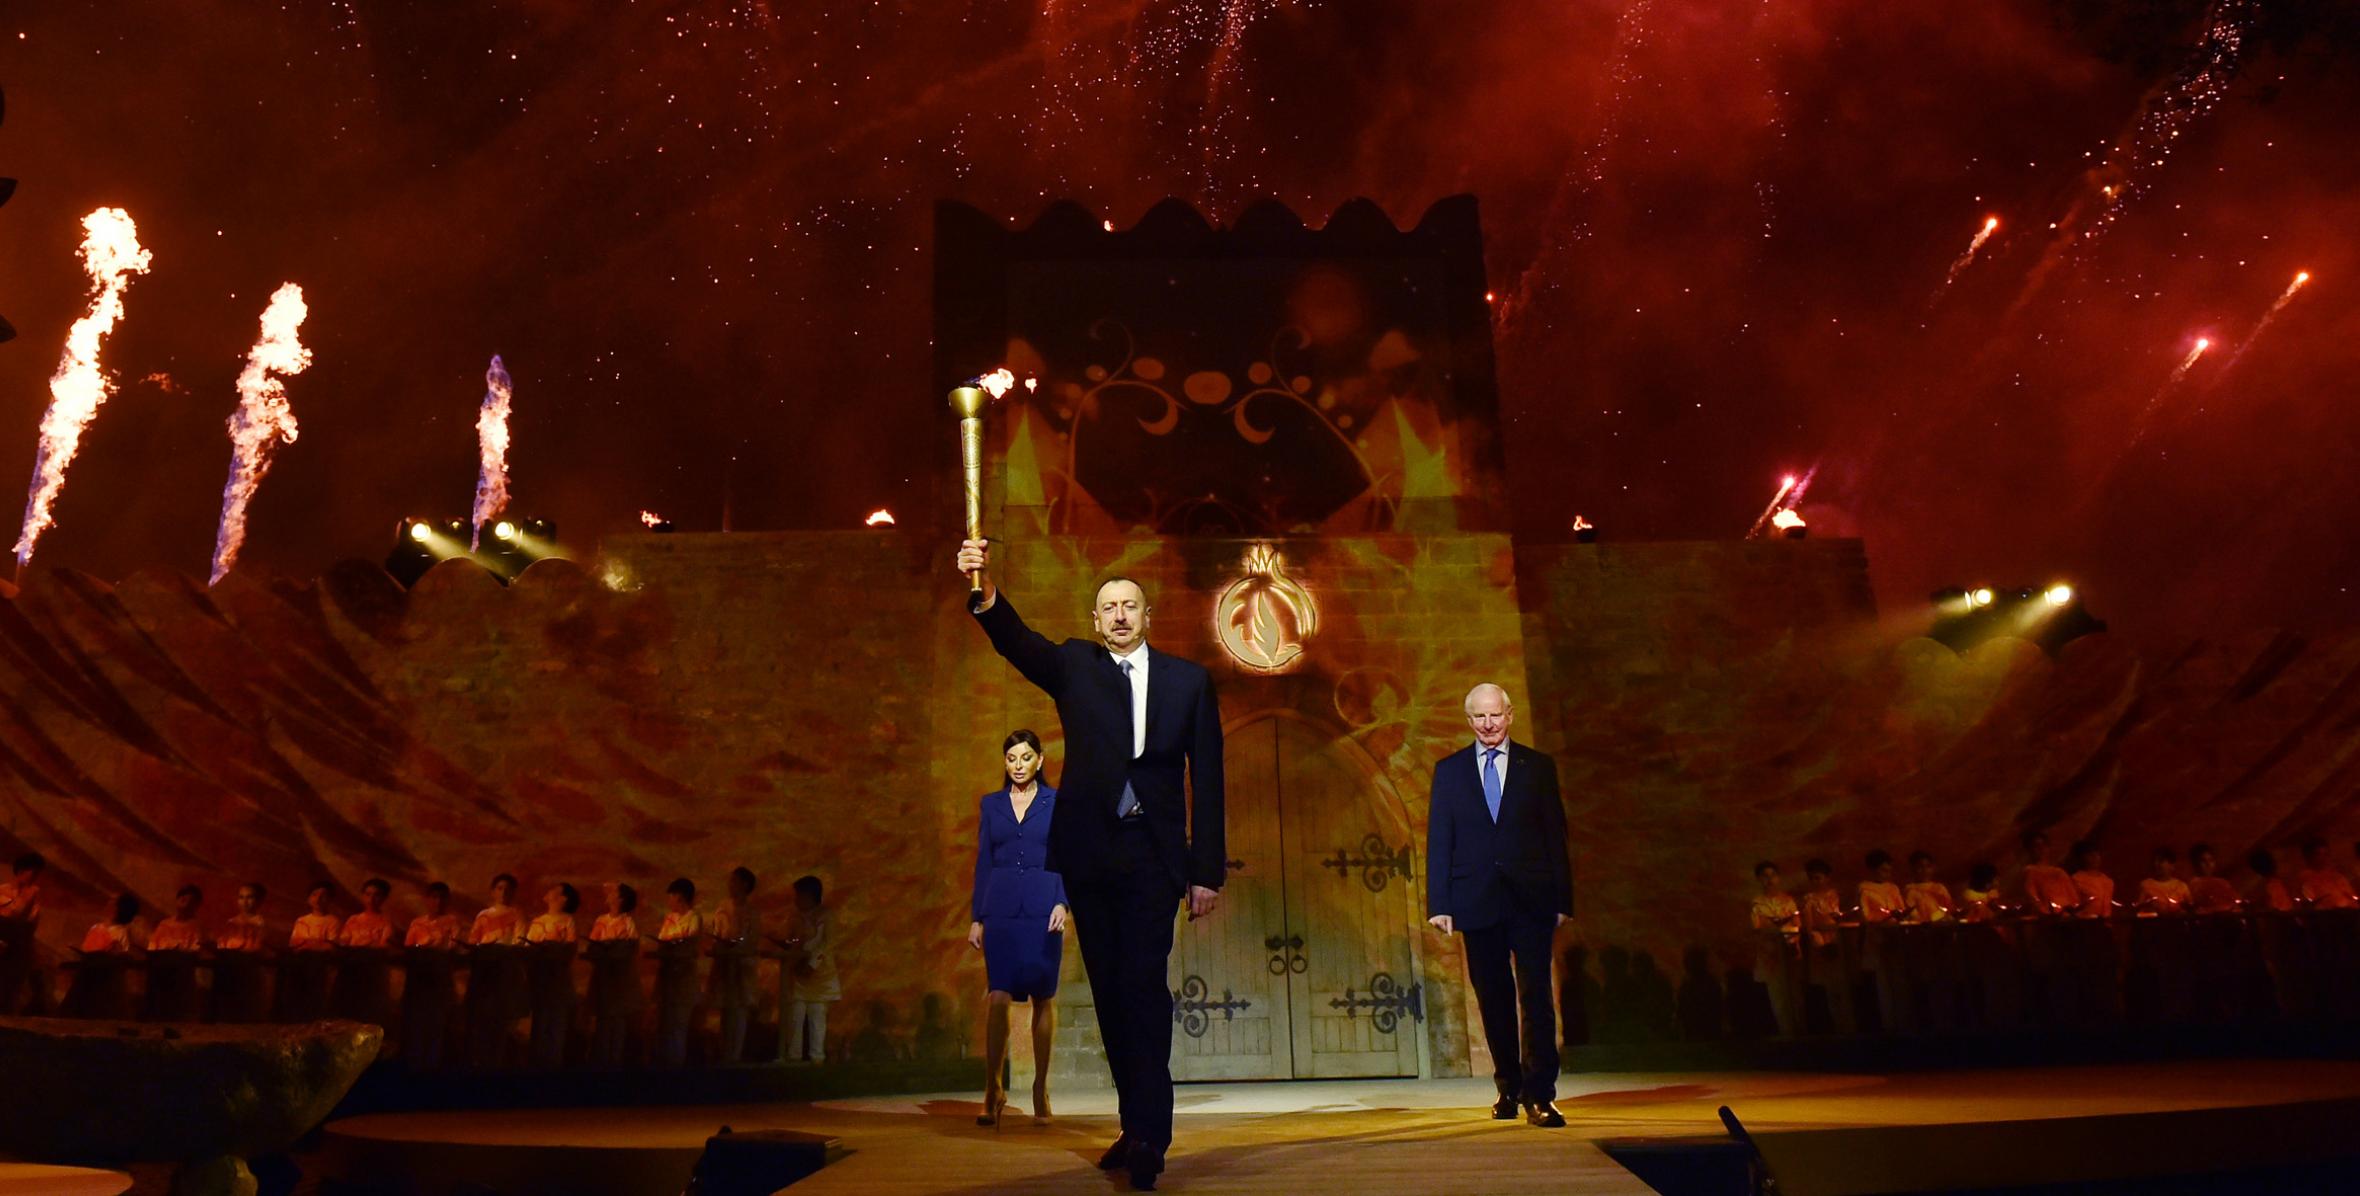 Ilham Aliyev attended the ceremony held to light the flame of Baku-2015 first European Games